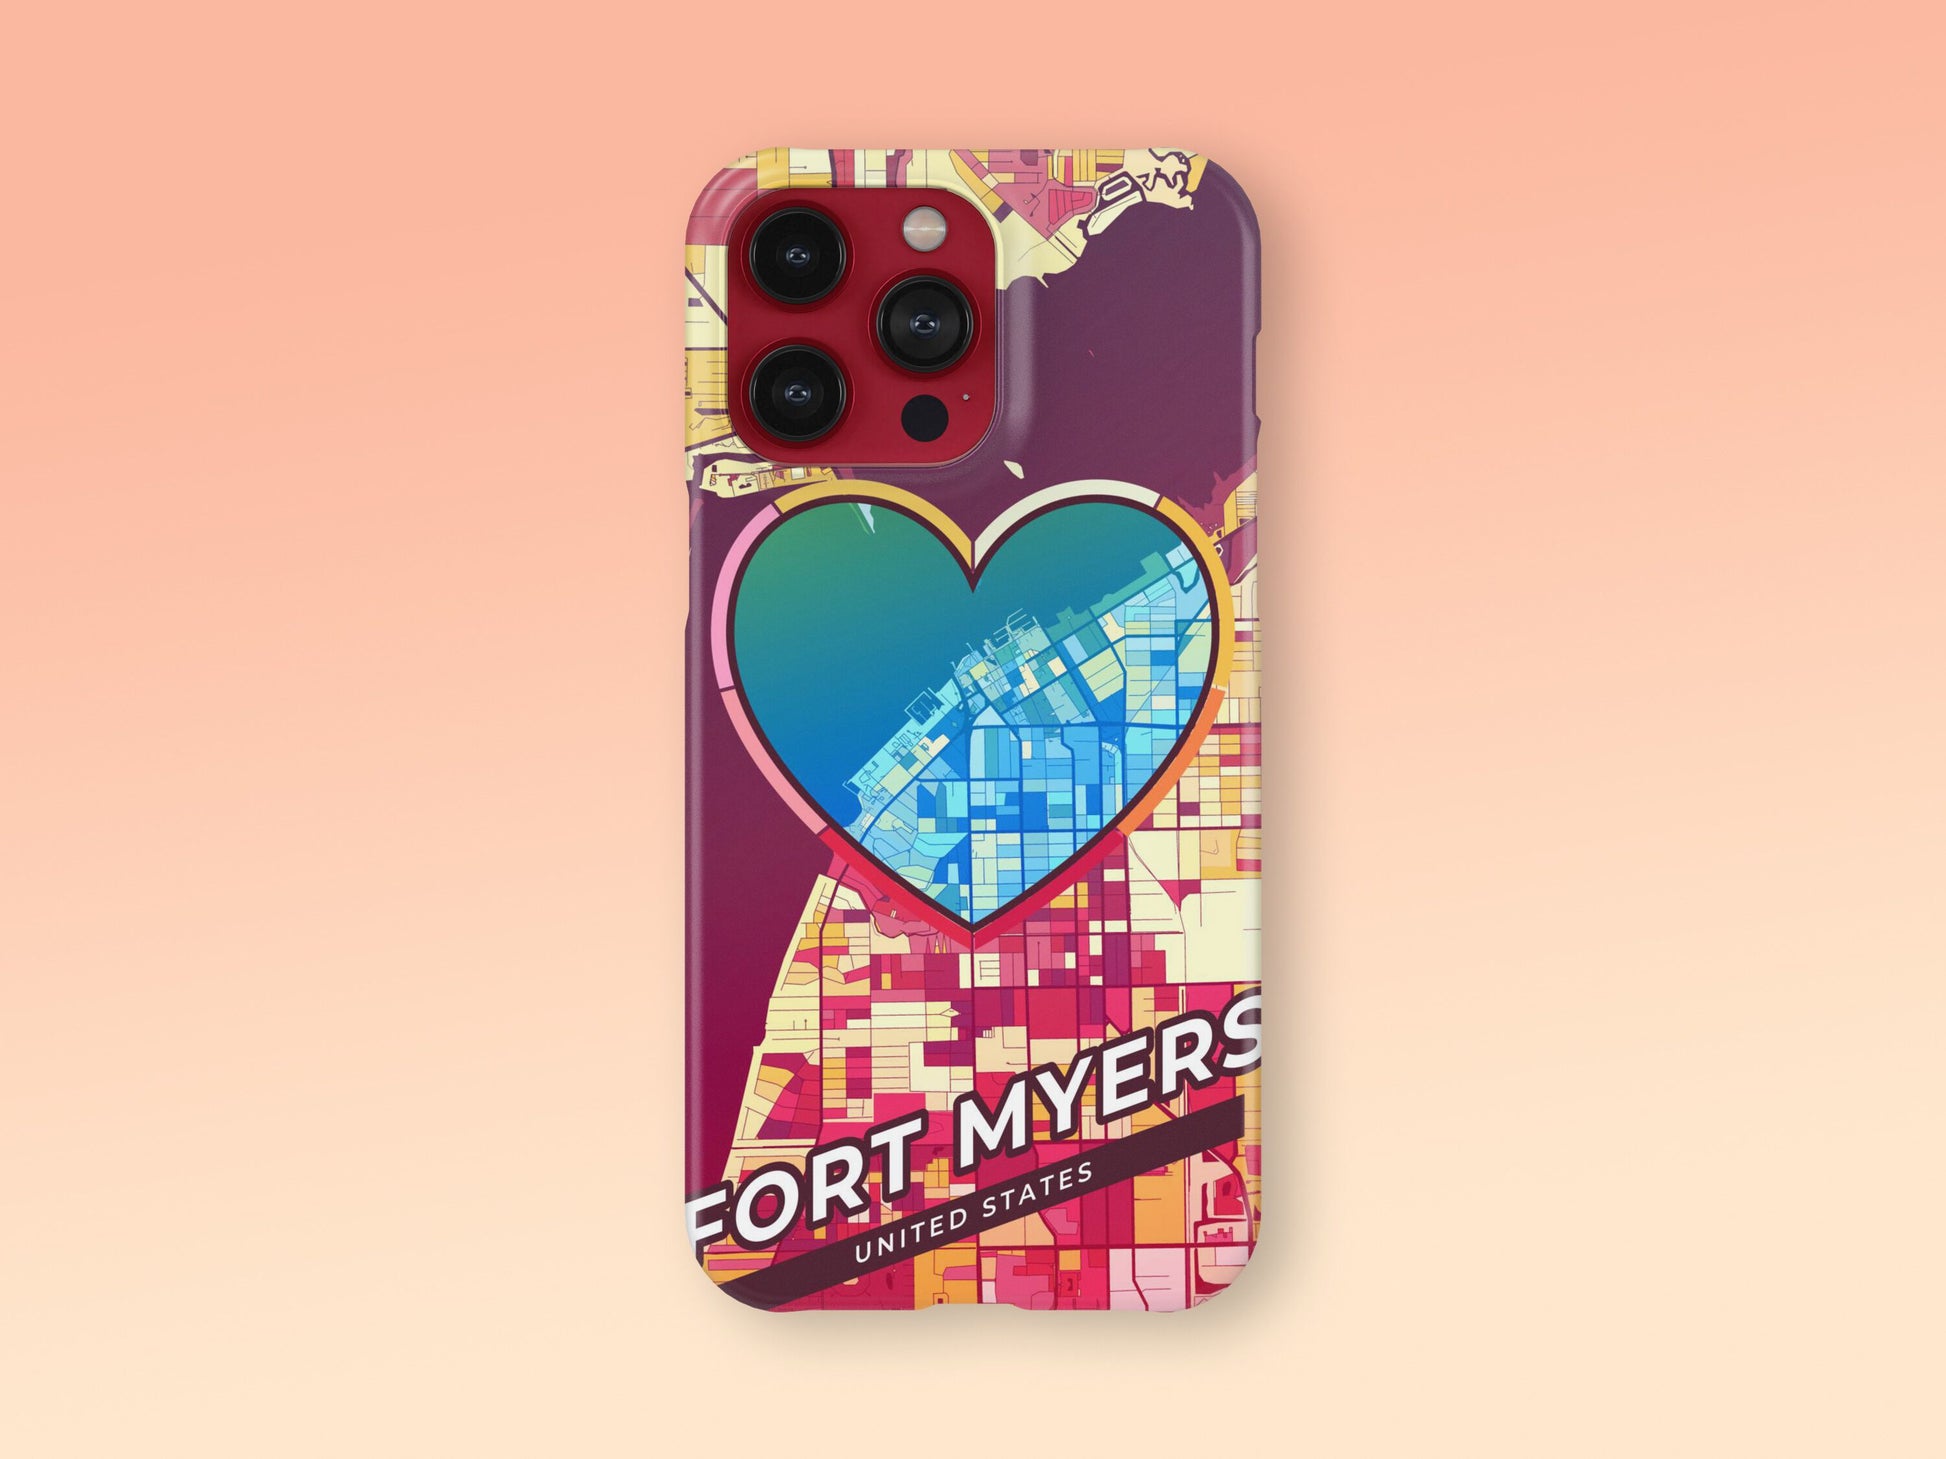 Fort Myers Florida slim phone case with colorful icon. Birthday, wedding or housewarming gift. Couple match cases. 2